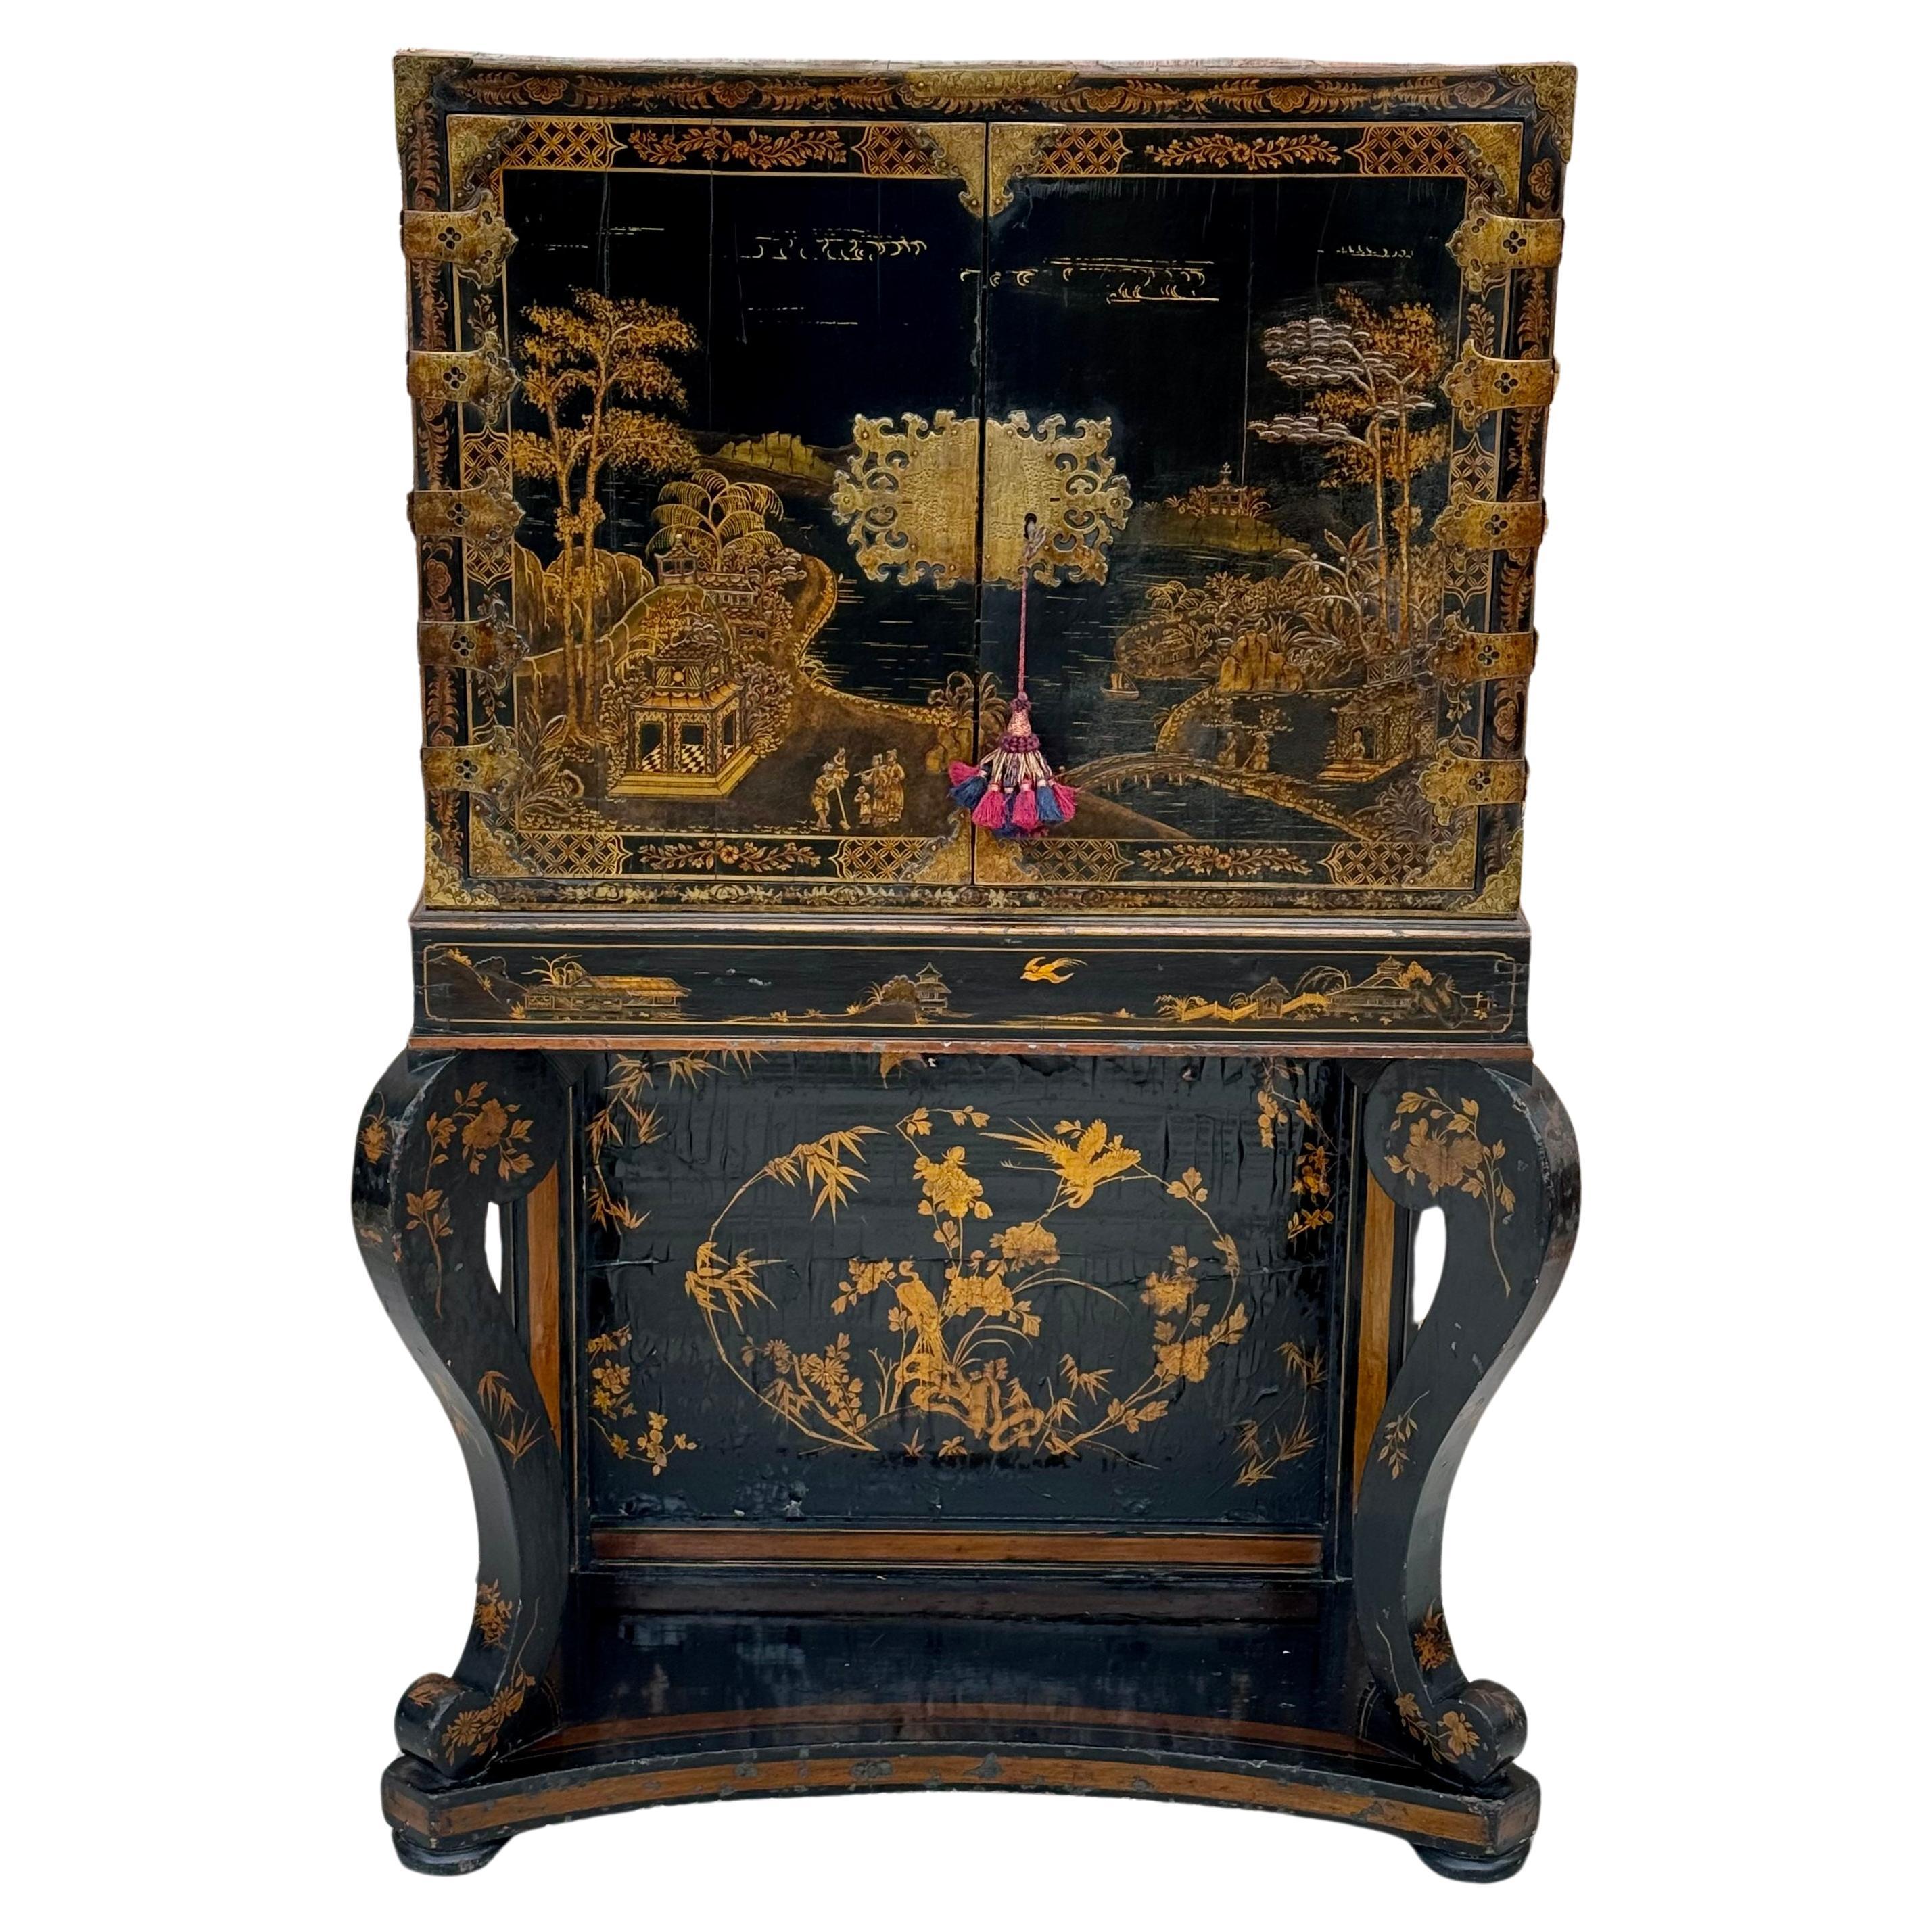 Early 19th Century English Chest on Stand Black and Gold Chinoiserie Lacquer